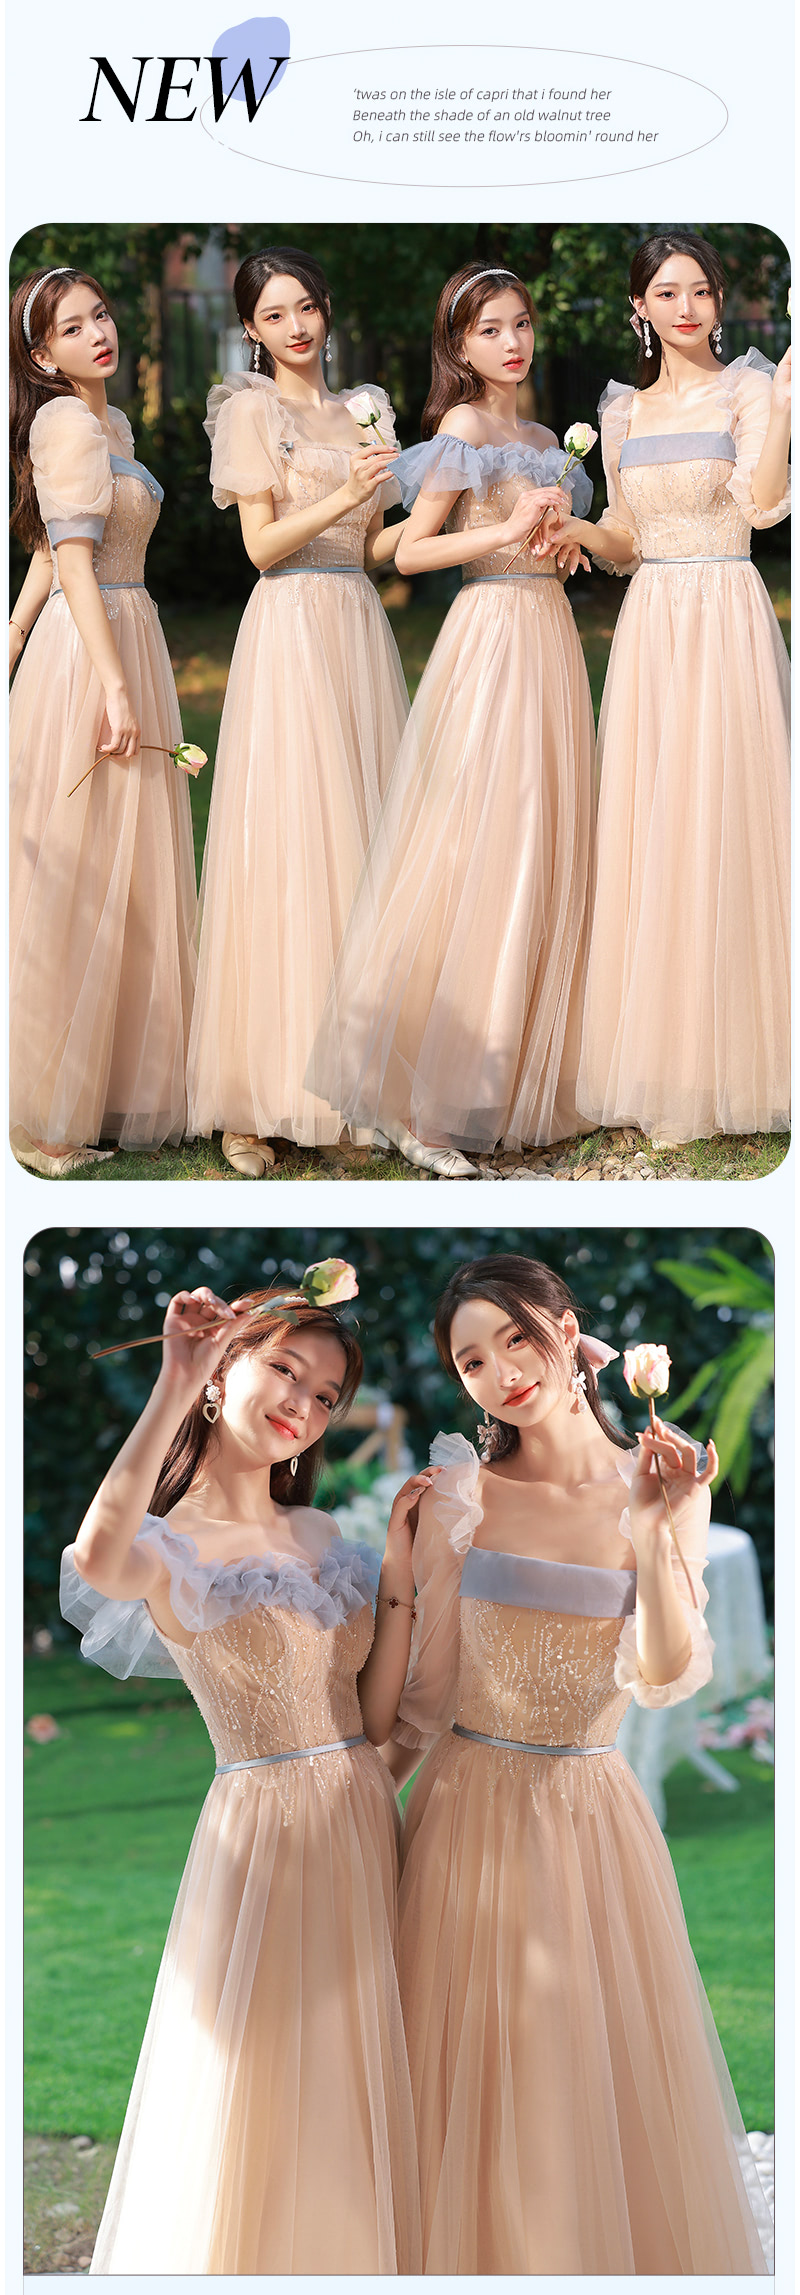 Fairy Bridesmaid Dress Wedding Guest Party Outfit Maxi Gown13